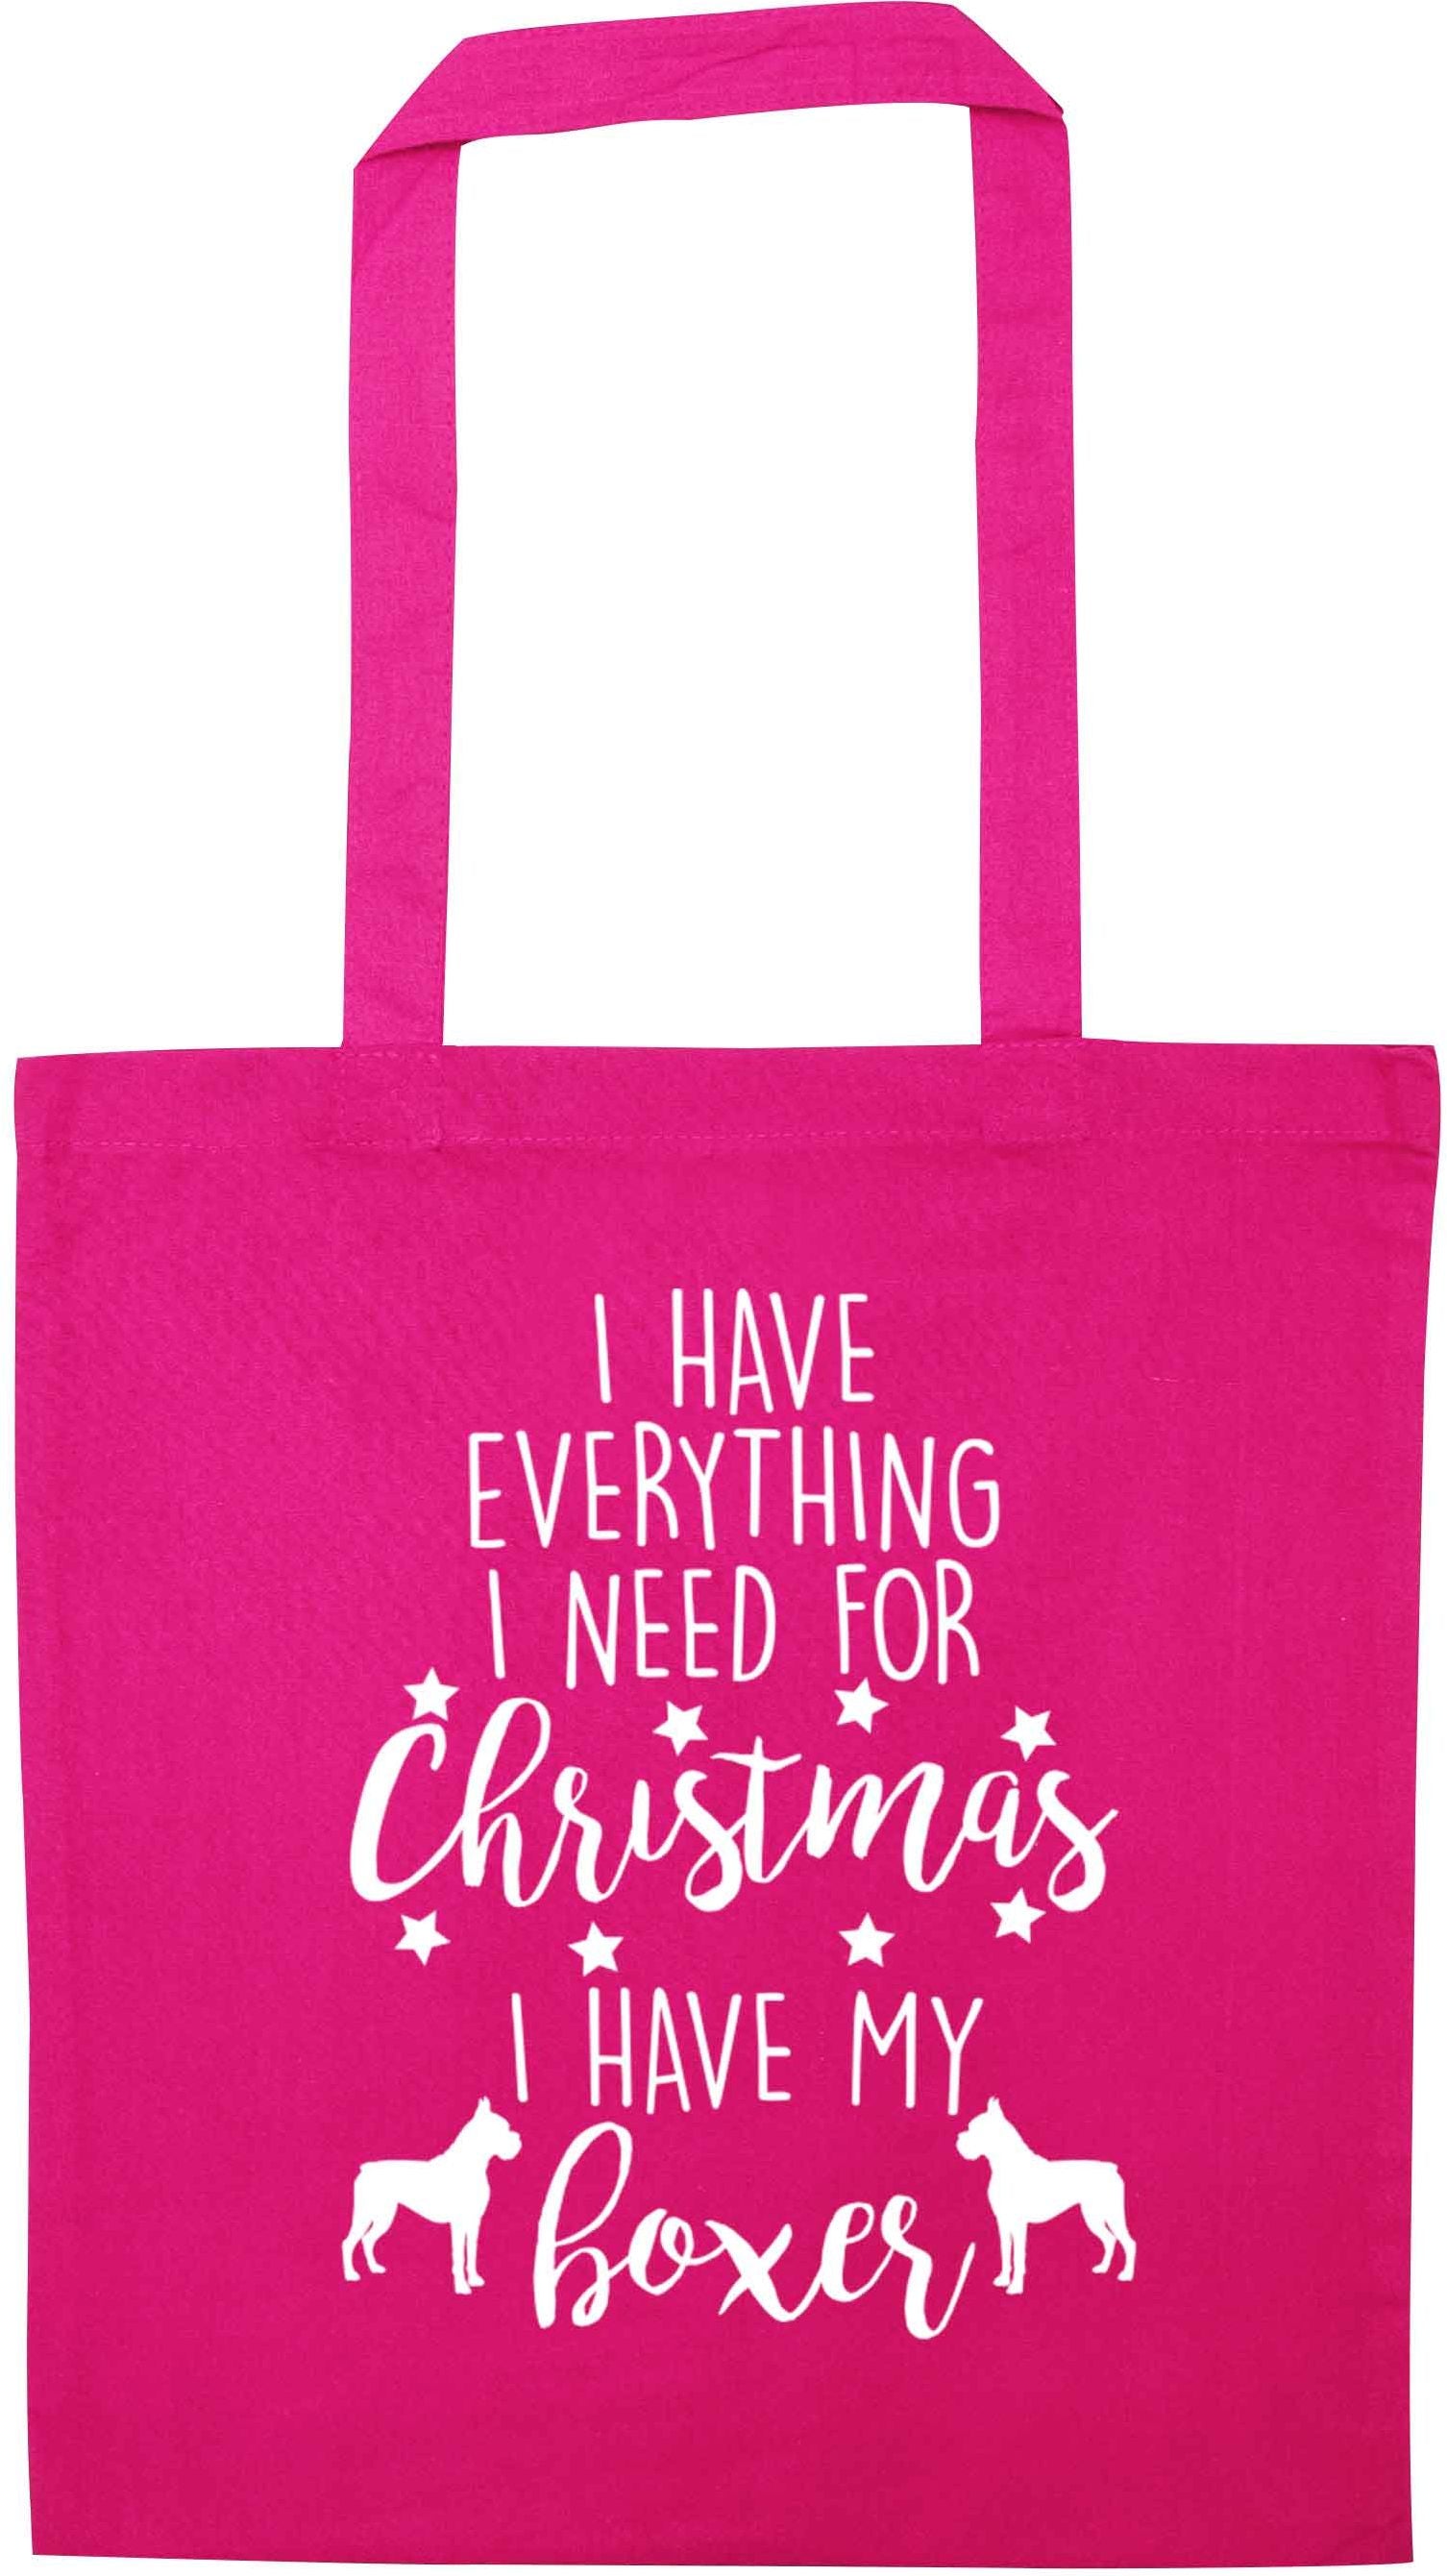 I have everything I need for Christmas I have my boxer pink tote bag